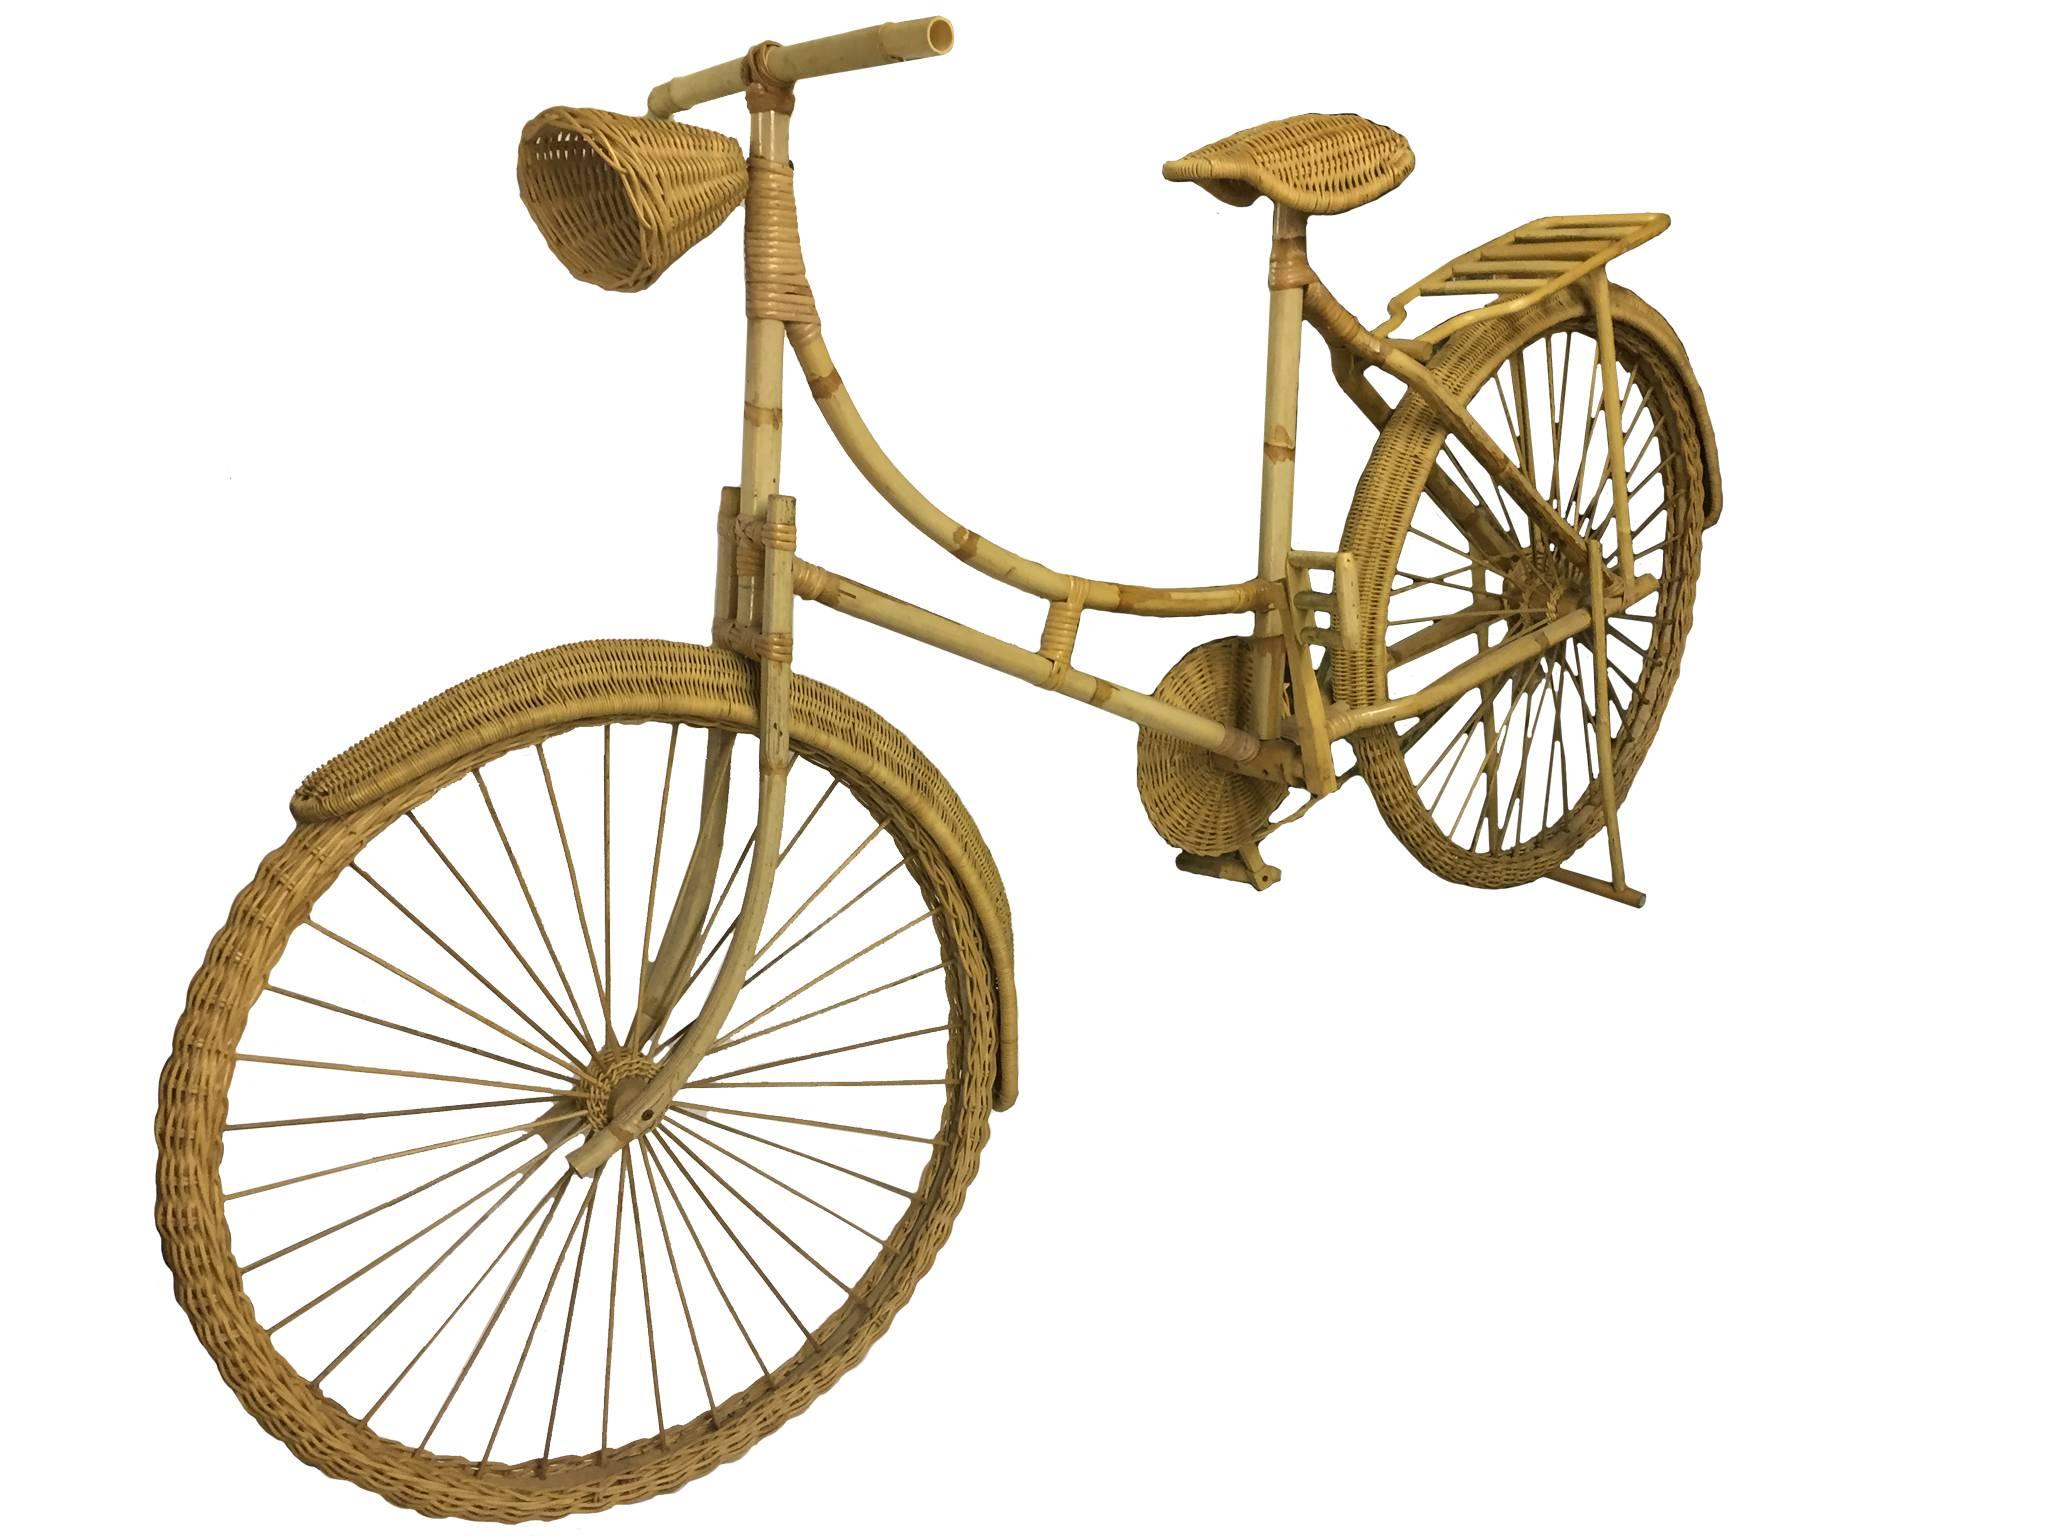 Old Fashioned Bike made out of wicker and bamboo. Hand crafted in 20th century. The bike is full size and has pedals, rack, kickstand, and headlight.